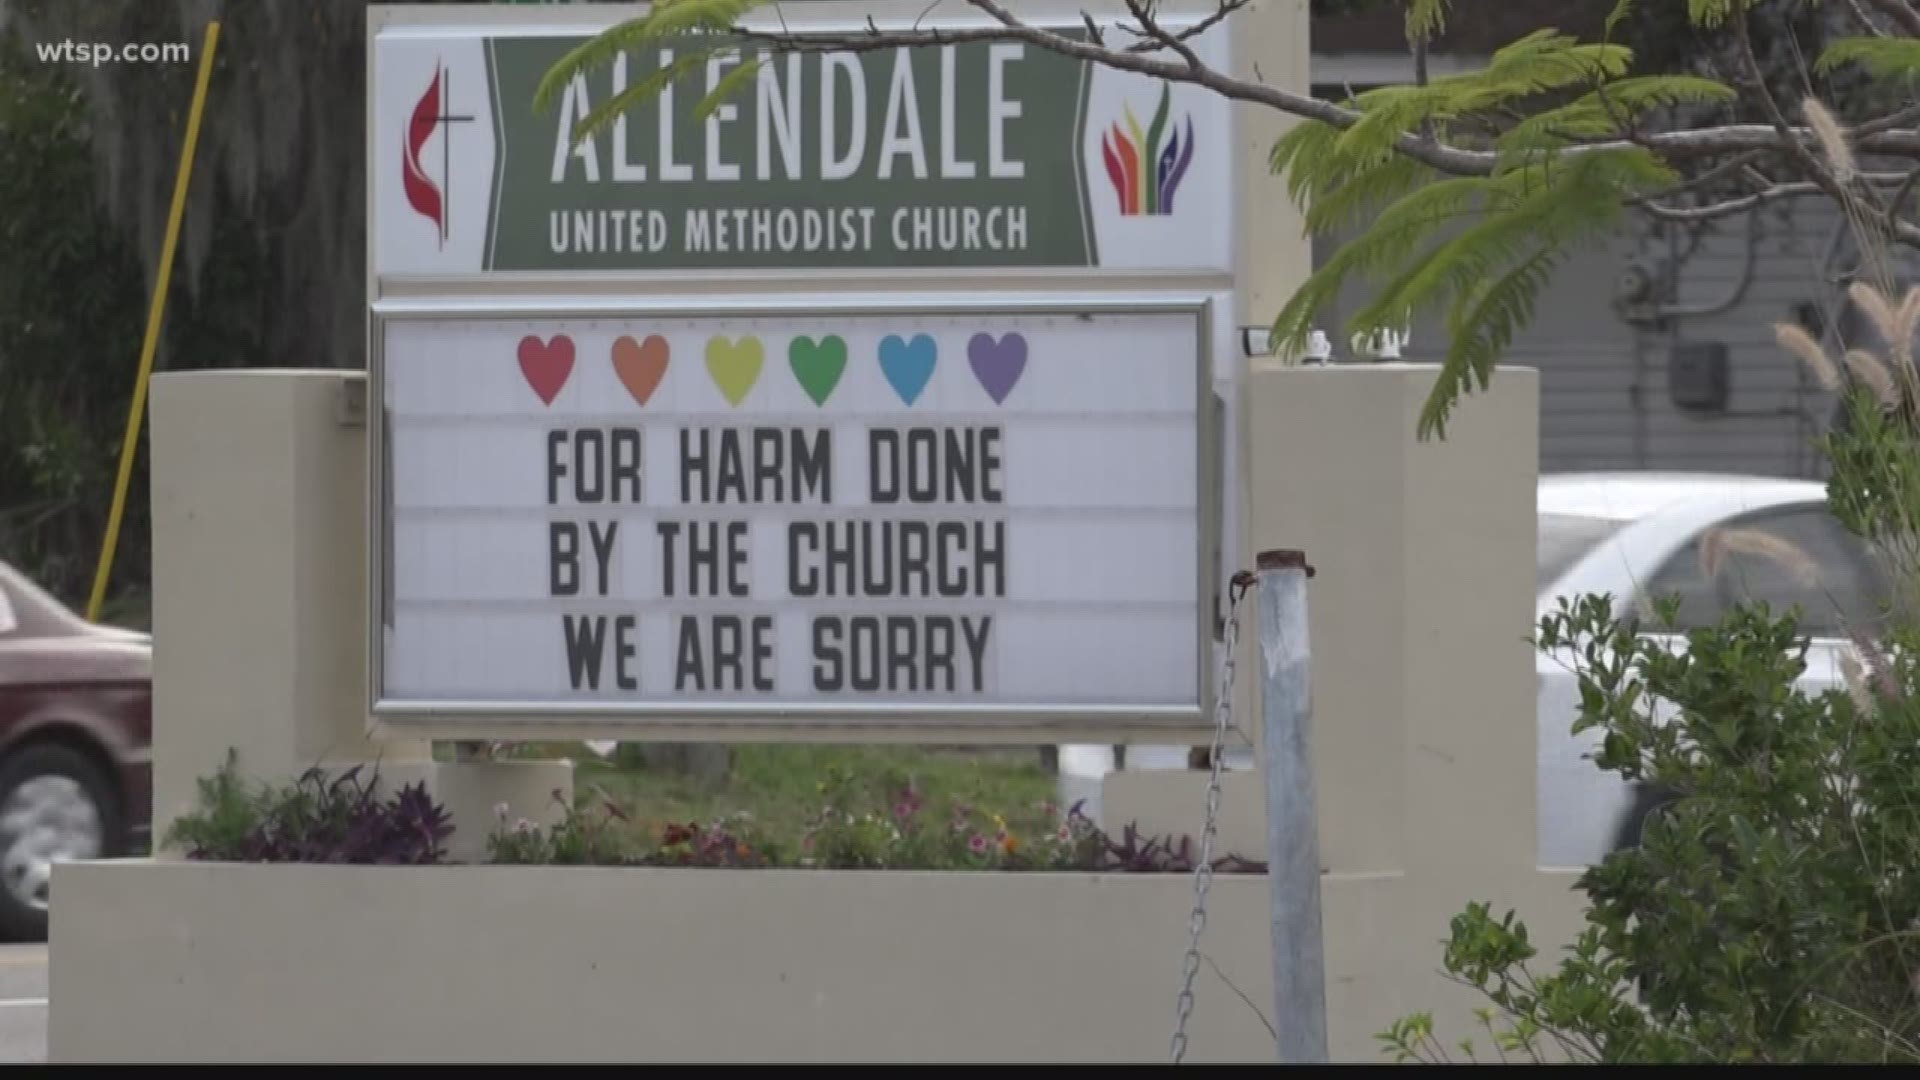 A St. Petersburg Methodist pastor is in a fight for his church because of his stance on same-sex marriage.

Rev. Andy Oliver at Allendale United Methodist Church in St. Petersburg has made no bones about his support of gay marriage and his willingness to officiate same-sex weddings in his church.

The marquee outside the church has made headlines for its poignantly progressive political statements and has often been the target of vandals as a result.